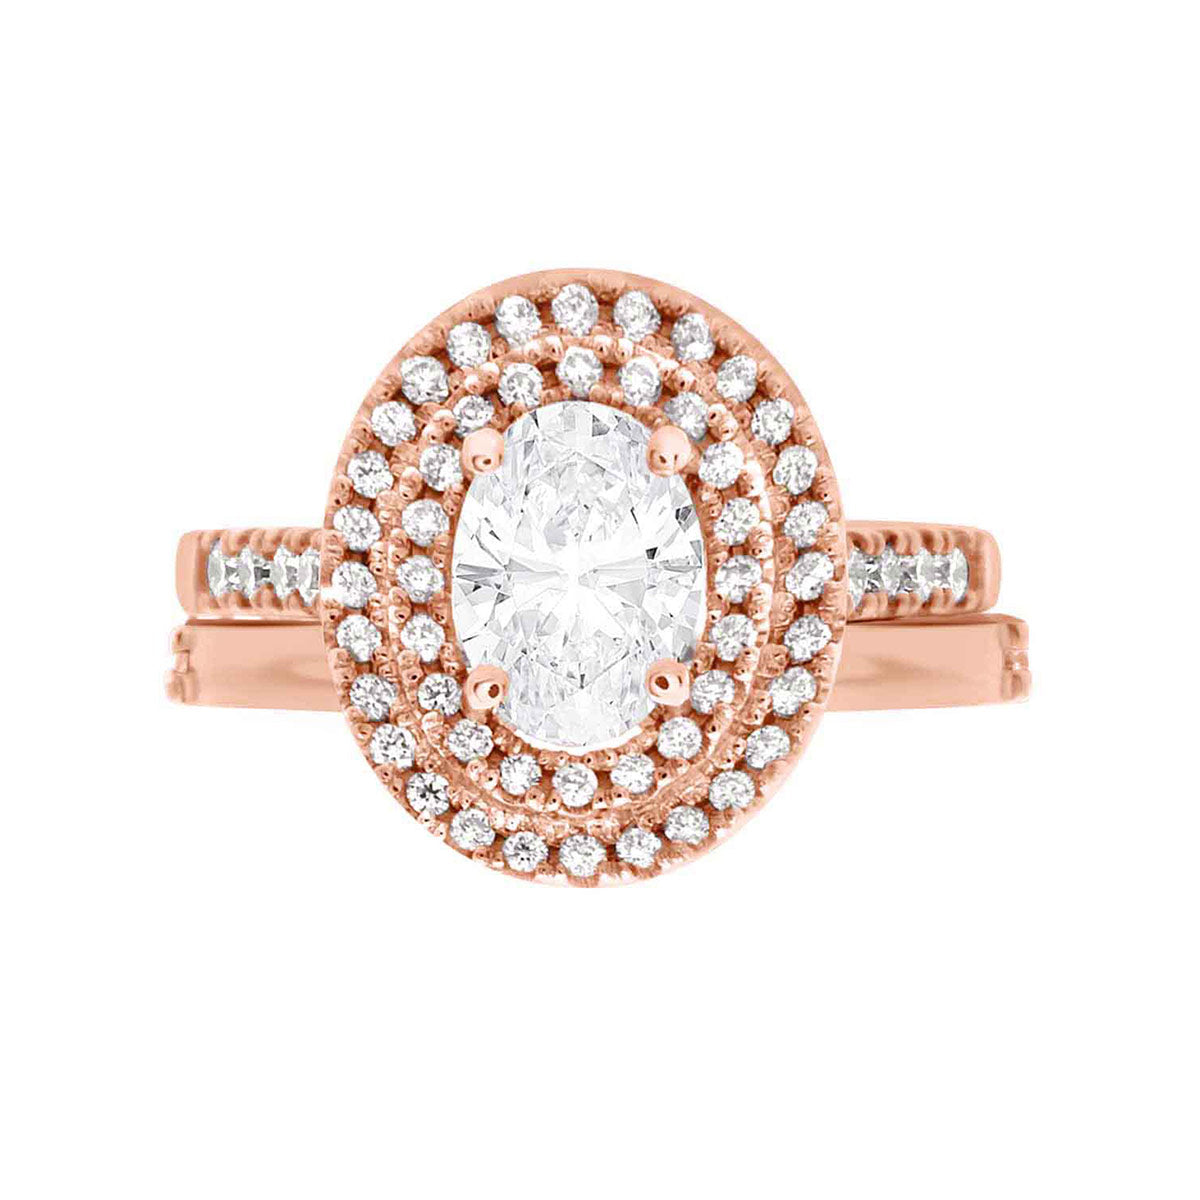 Double Halo Oval Engagement Ring In rose gold with a matching plain weddingf ringf